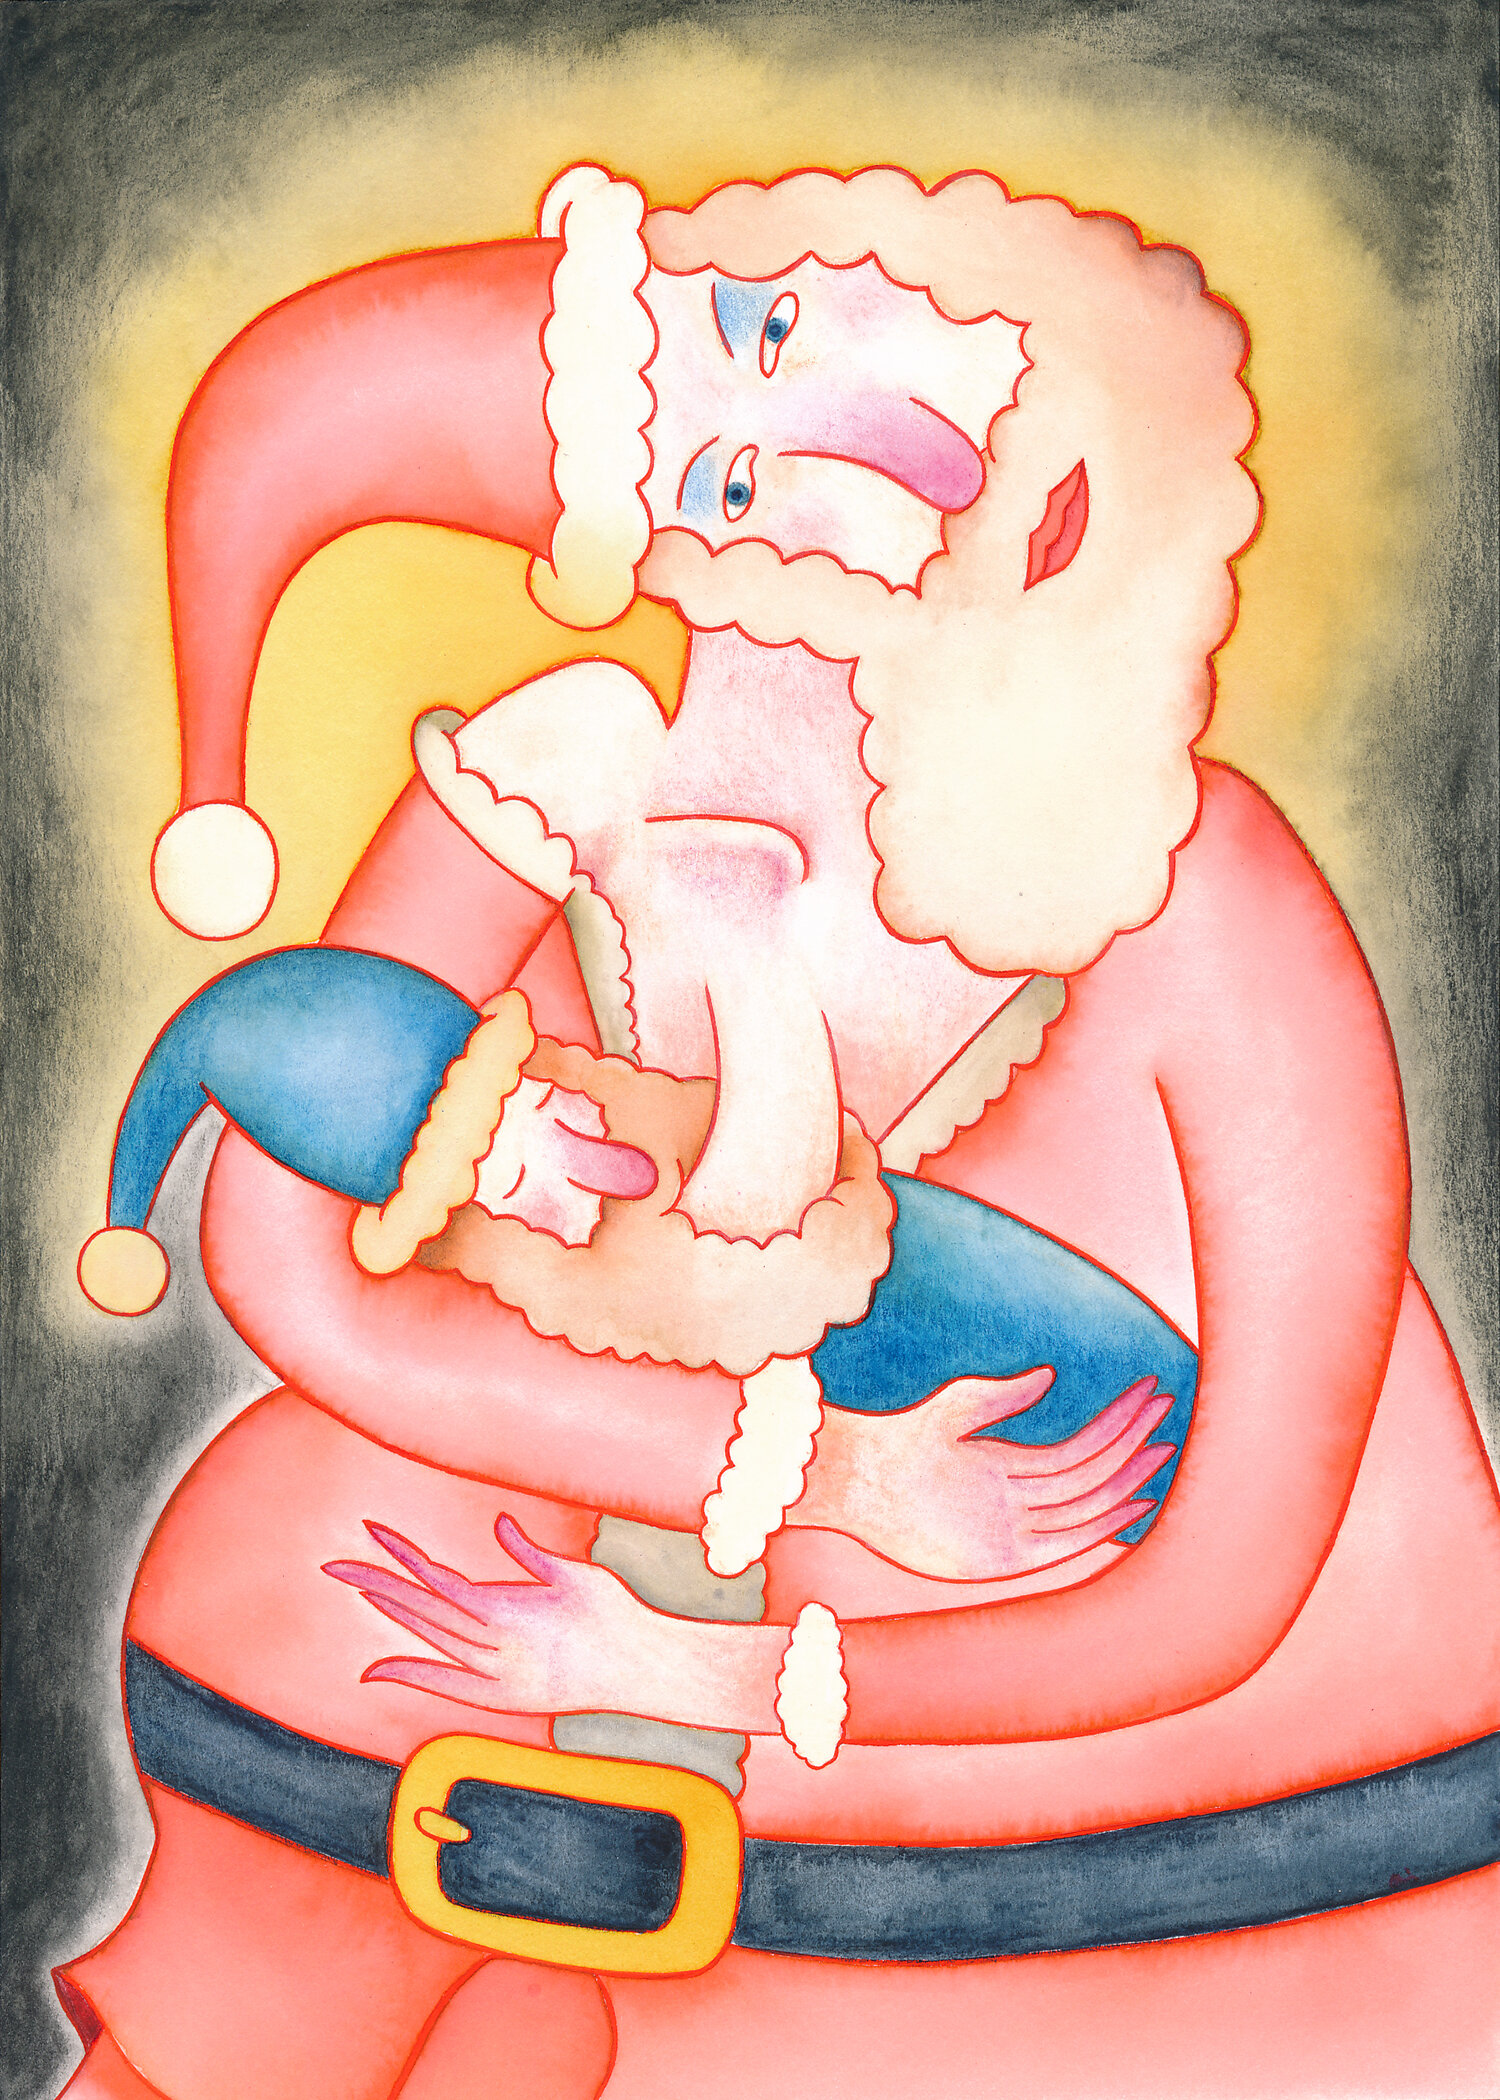 Claus and Child